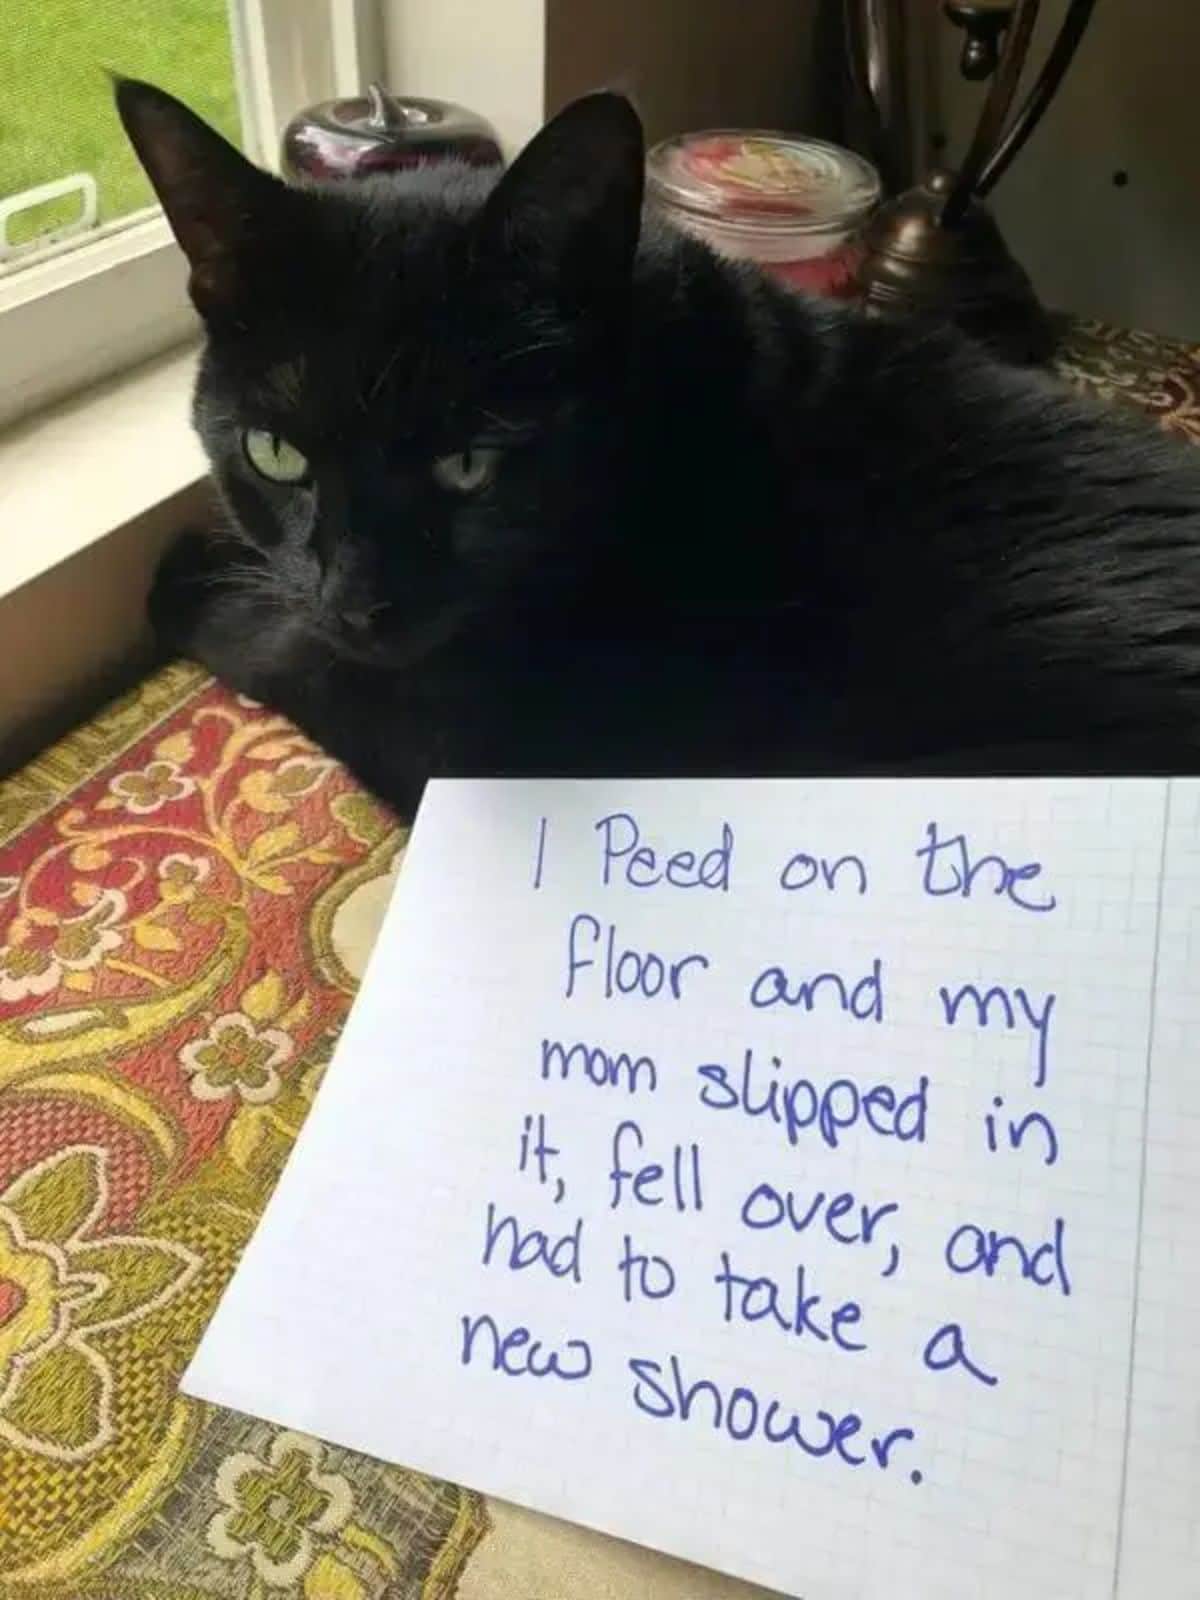 black cat laying on a blanket next to a sign on a white paper that says i peed on the floor and my mom slipped in it, fell over, and had to take a new shower